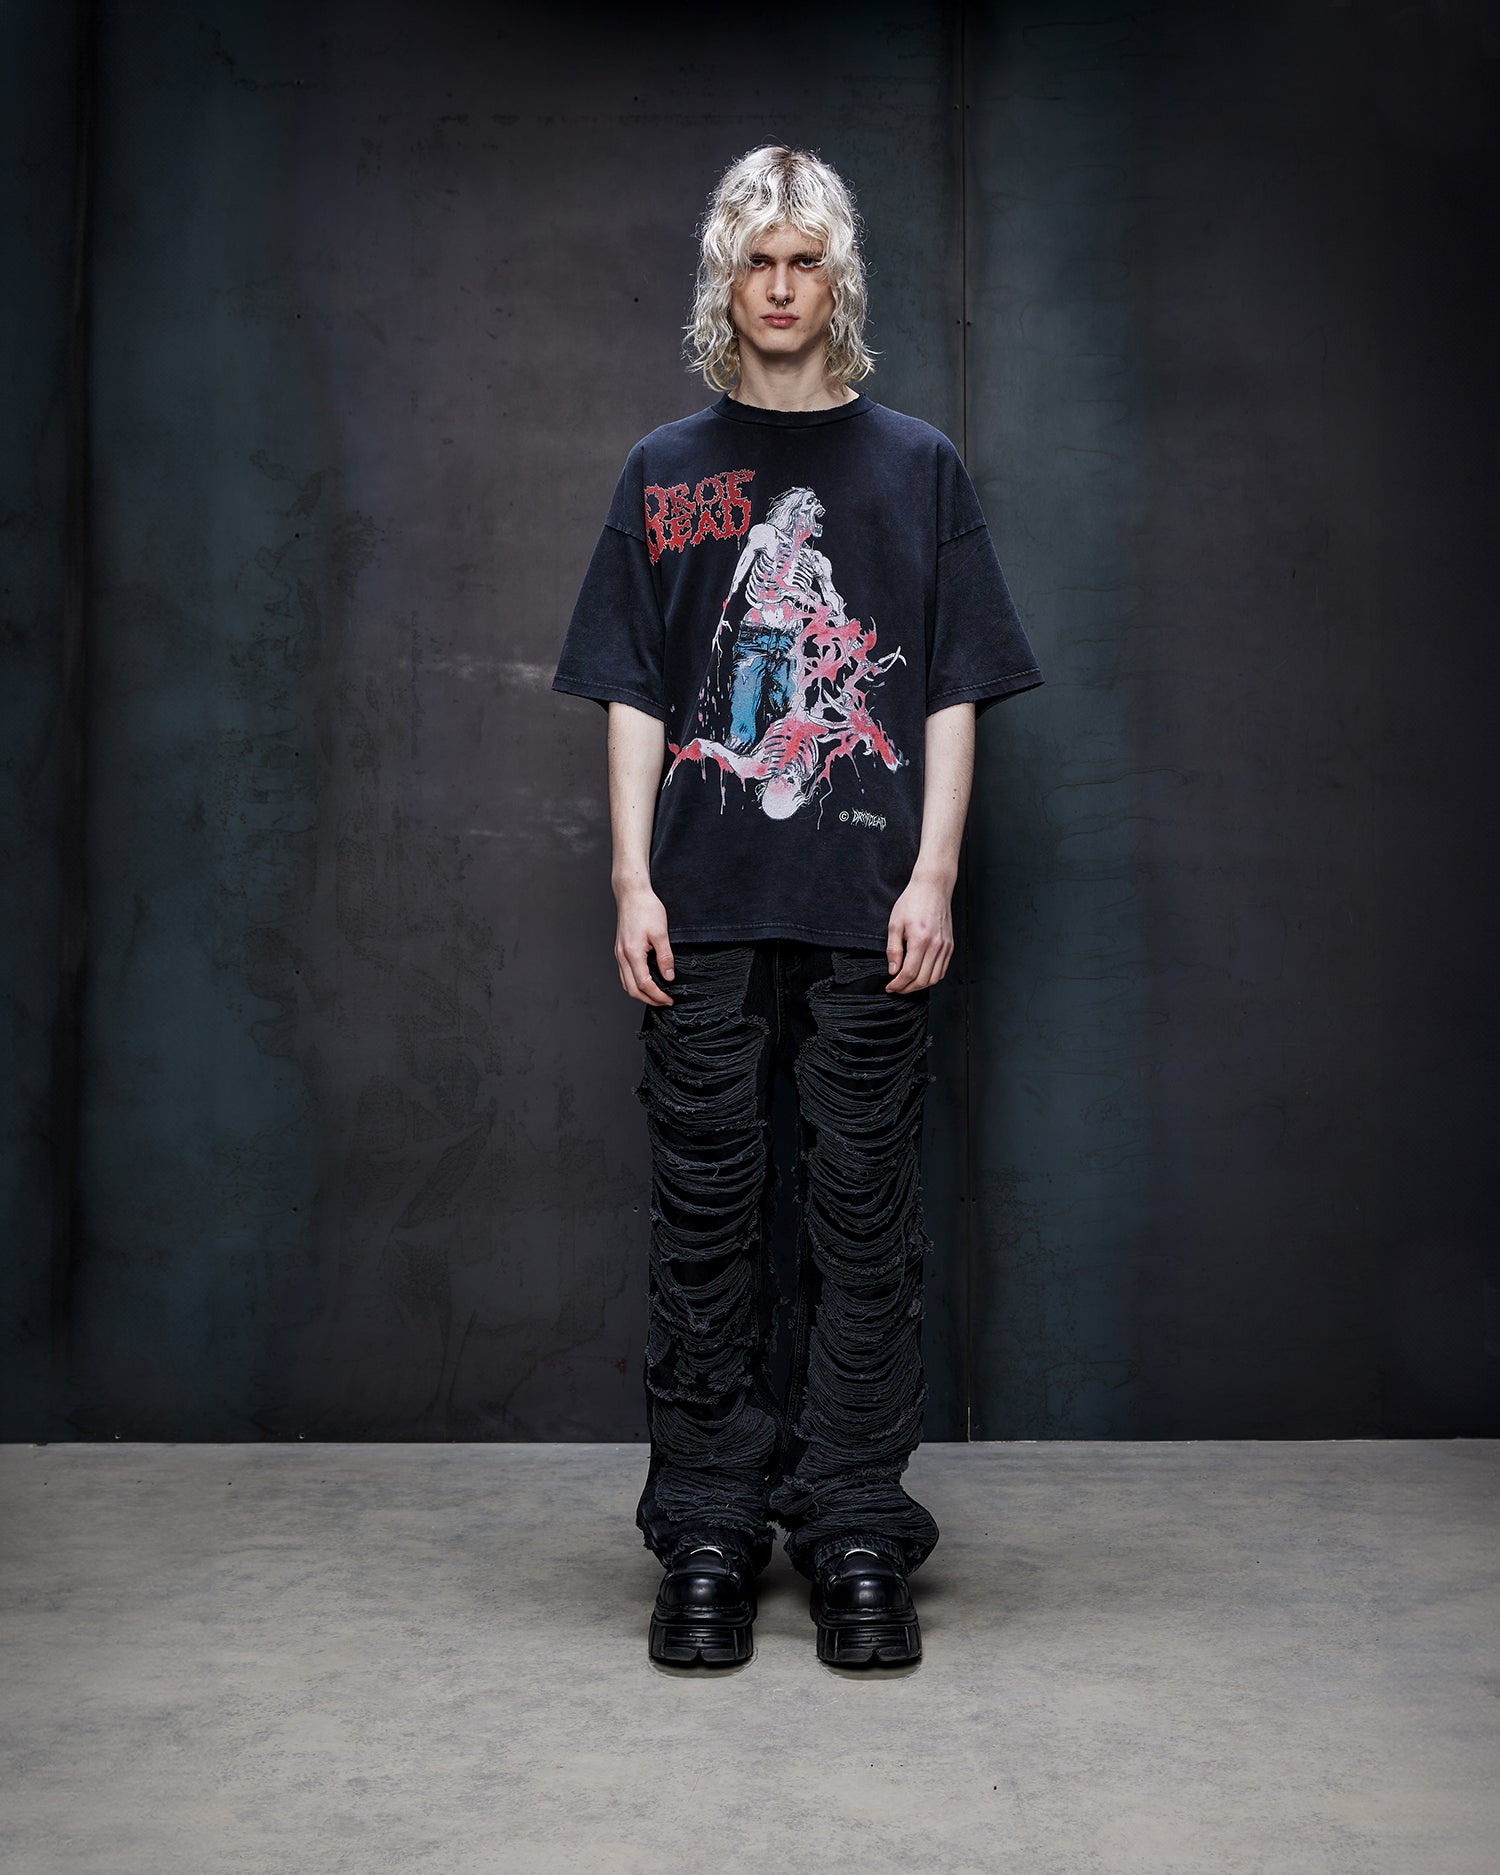 Unisex T-Shirts, Longsleeves, polo's and more from Drop Dead